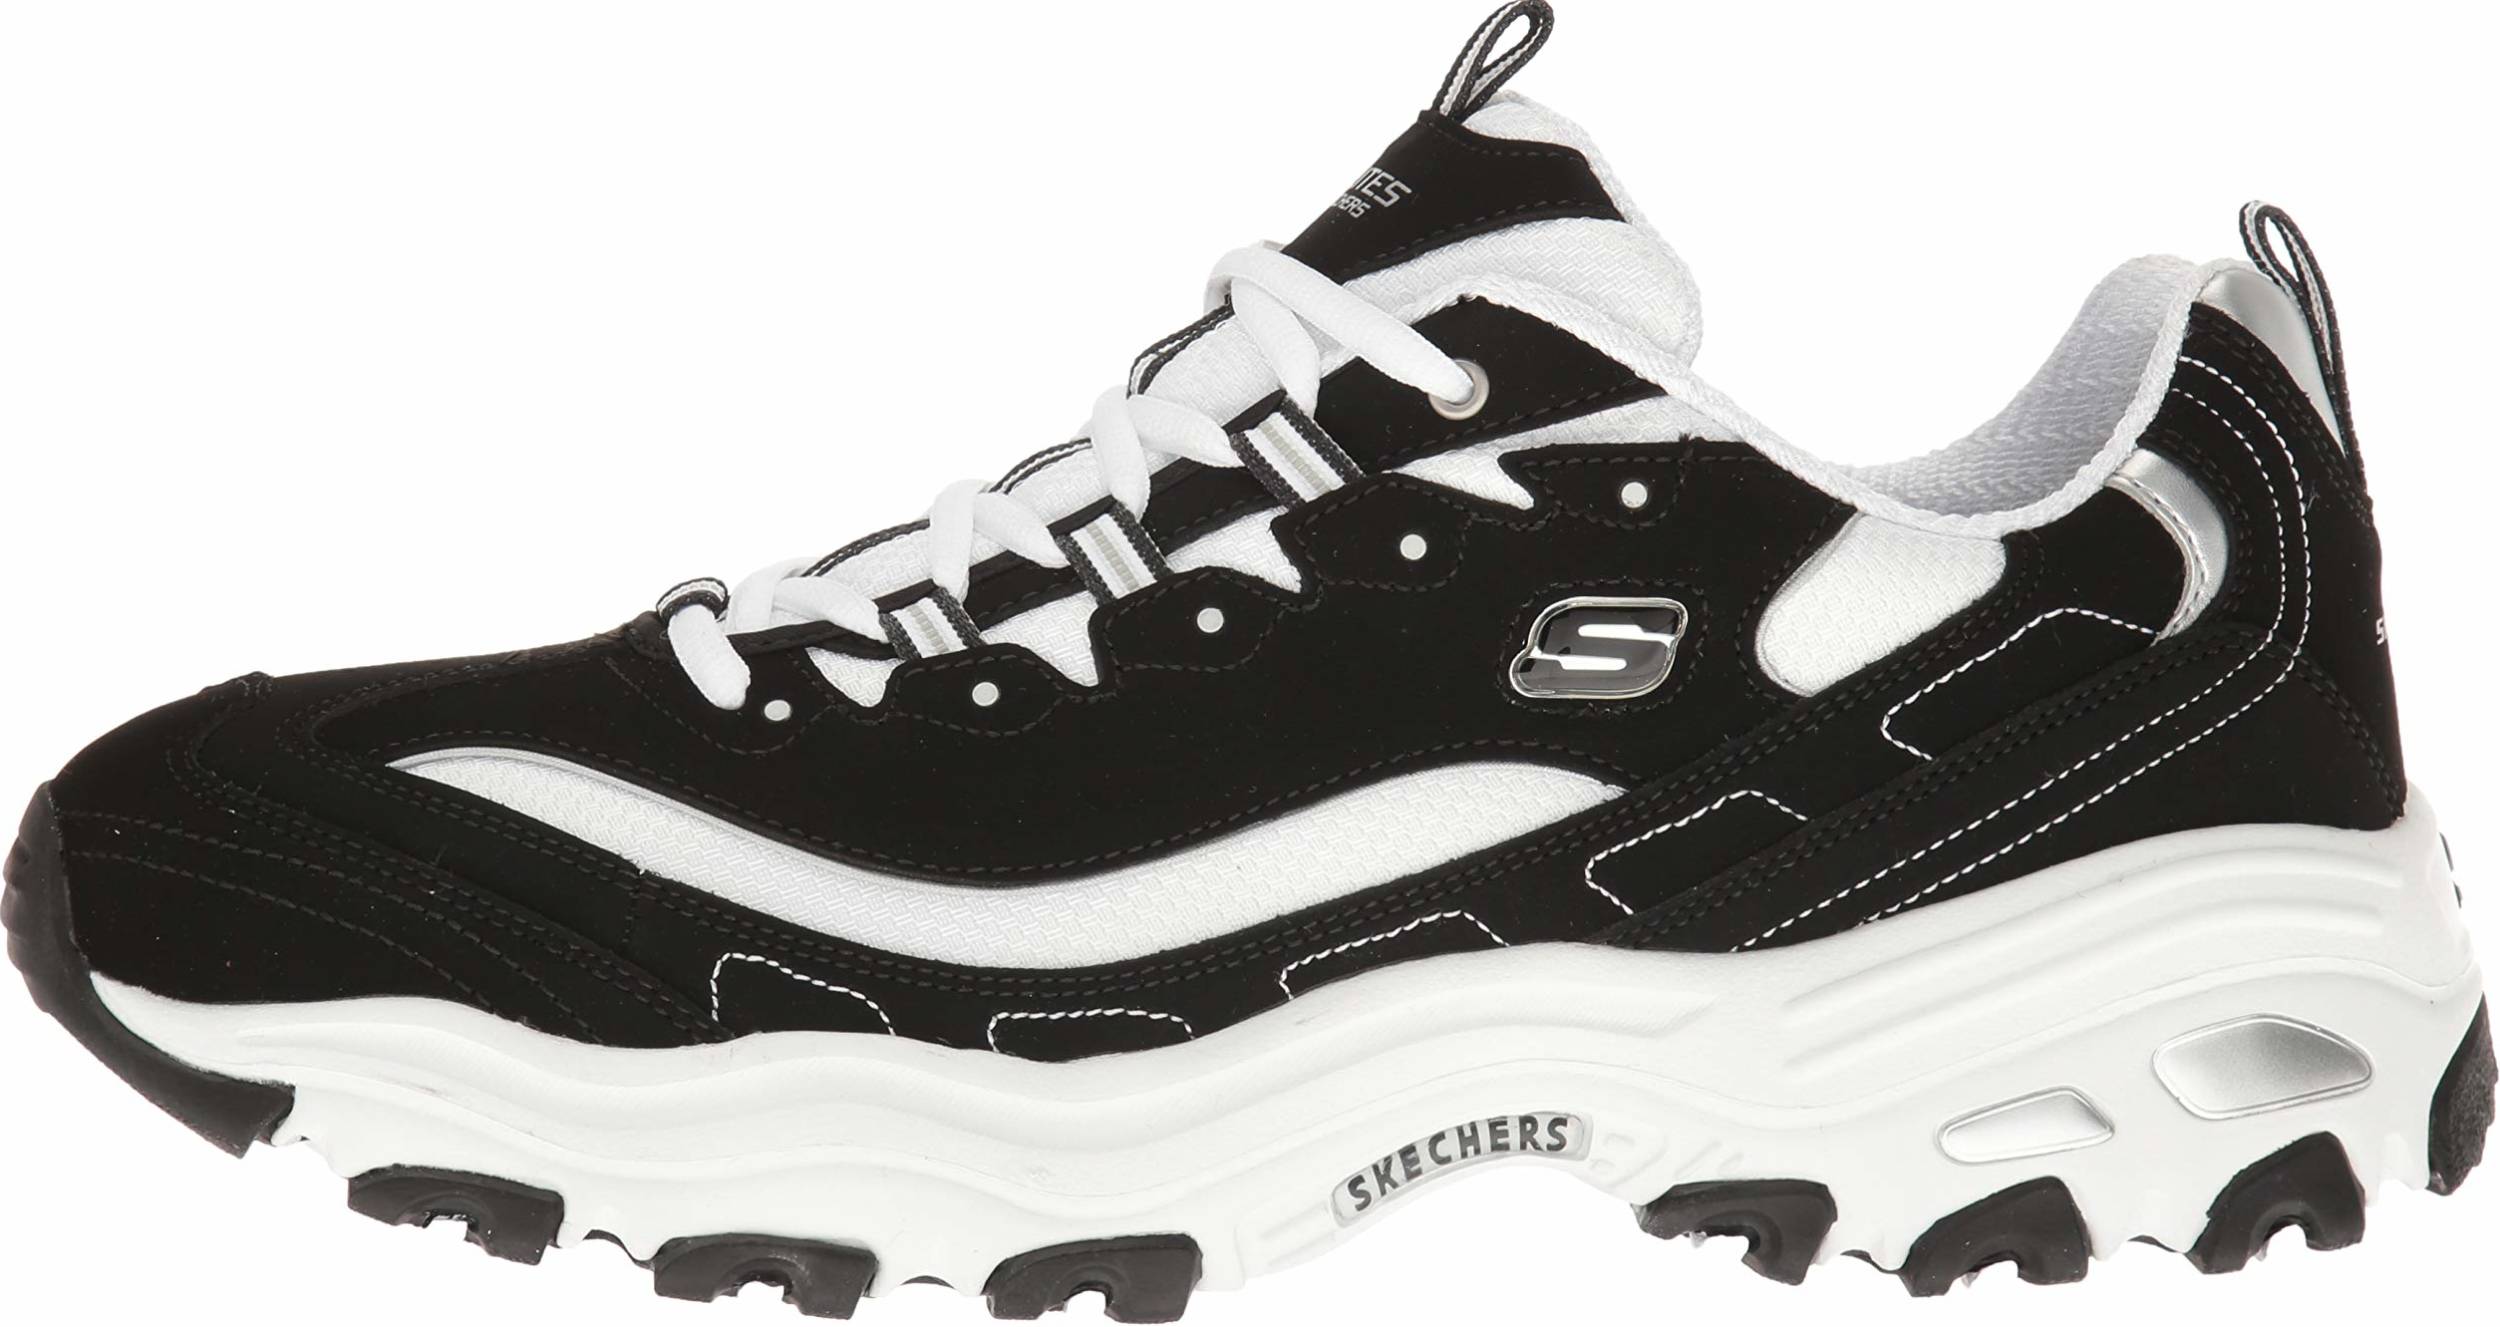 Only $47 + Review of Skechers D'Lites 